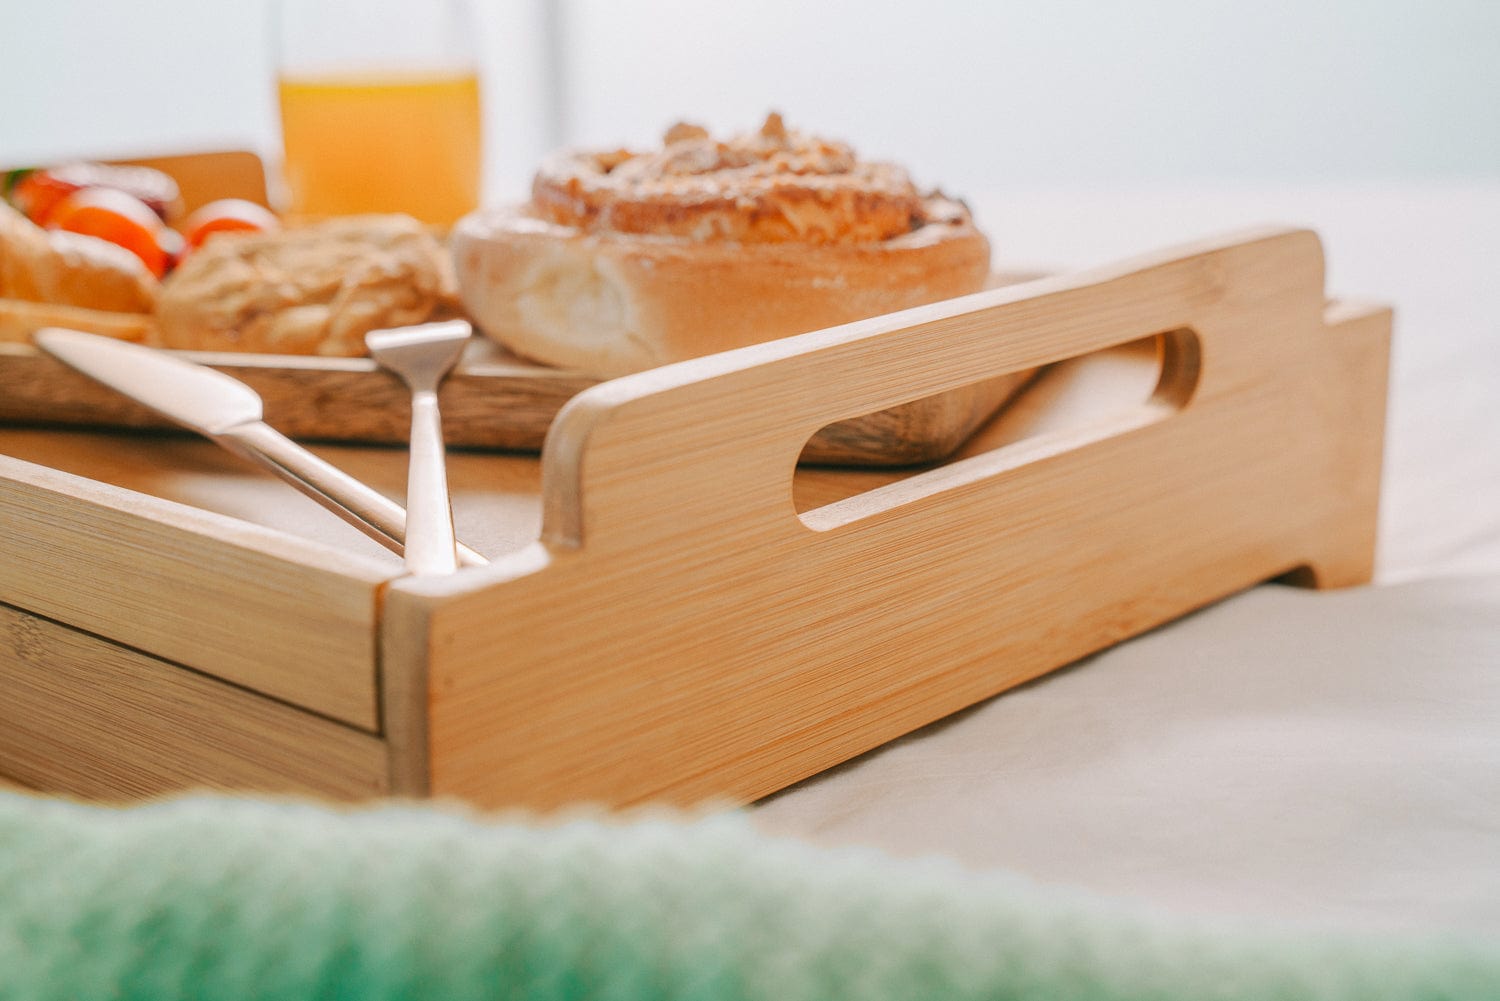 Living Today Bamboo Bamboo Serving Tray With Drawer